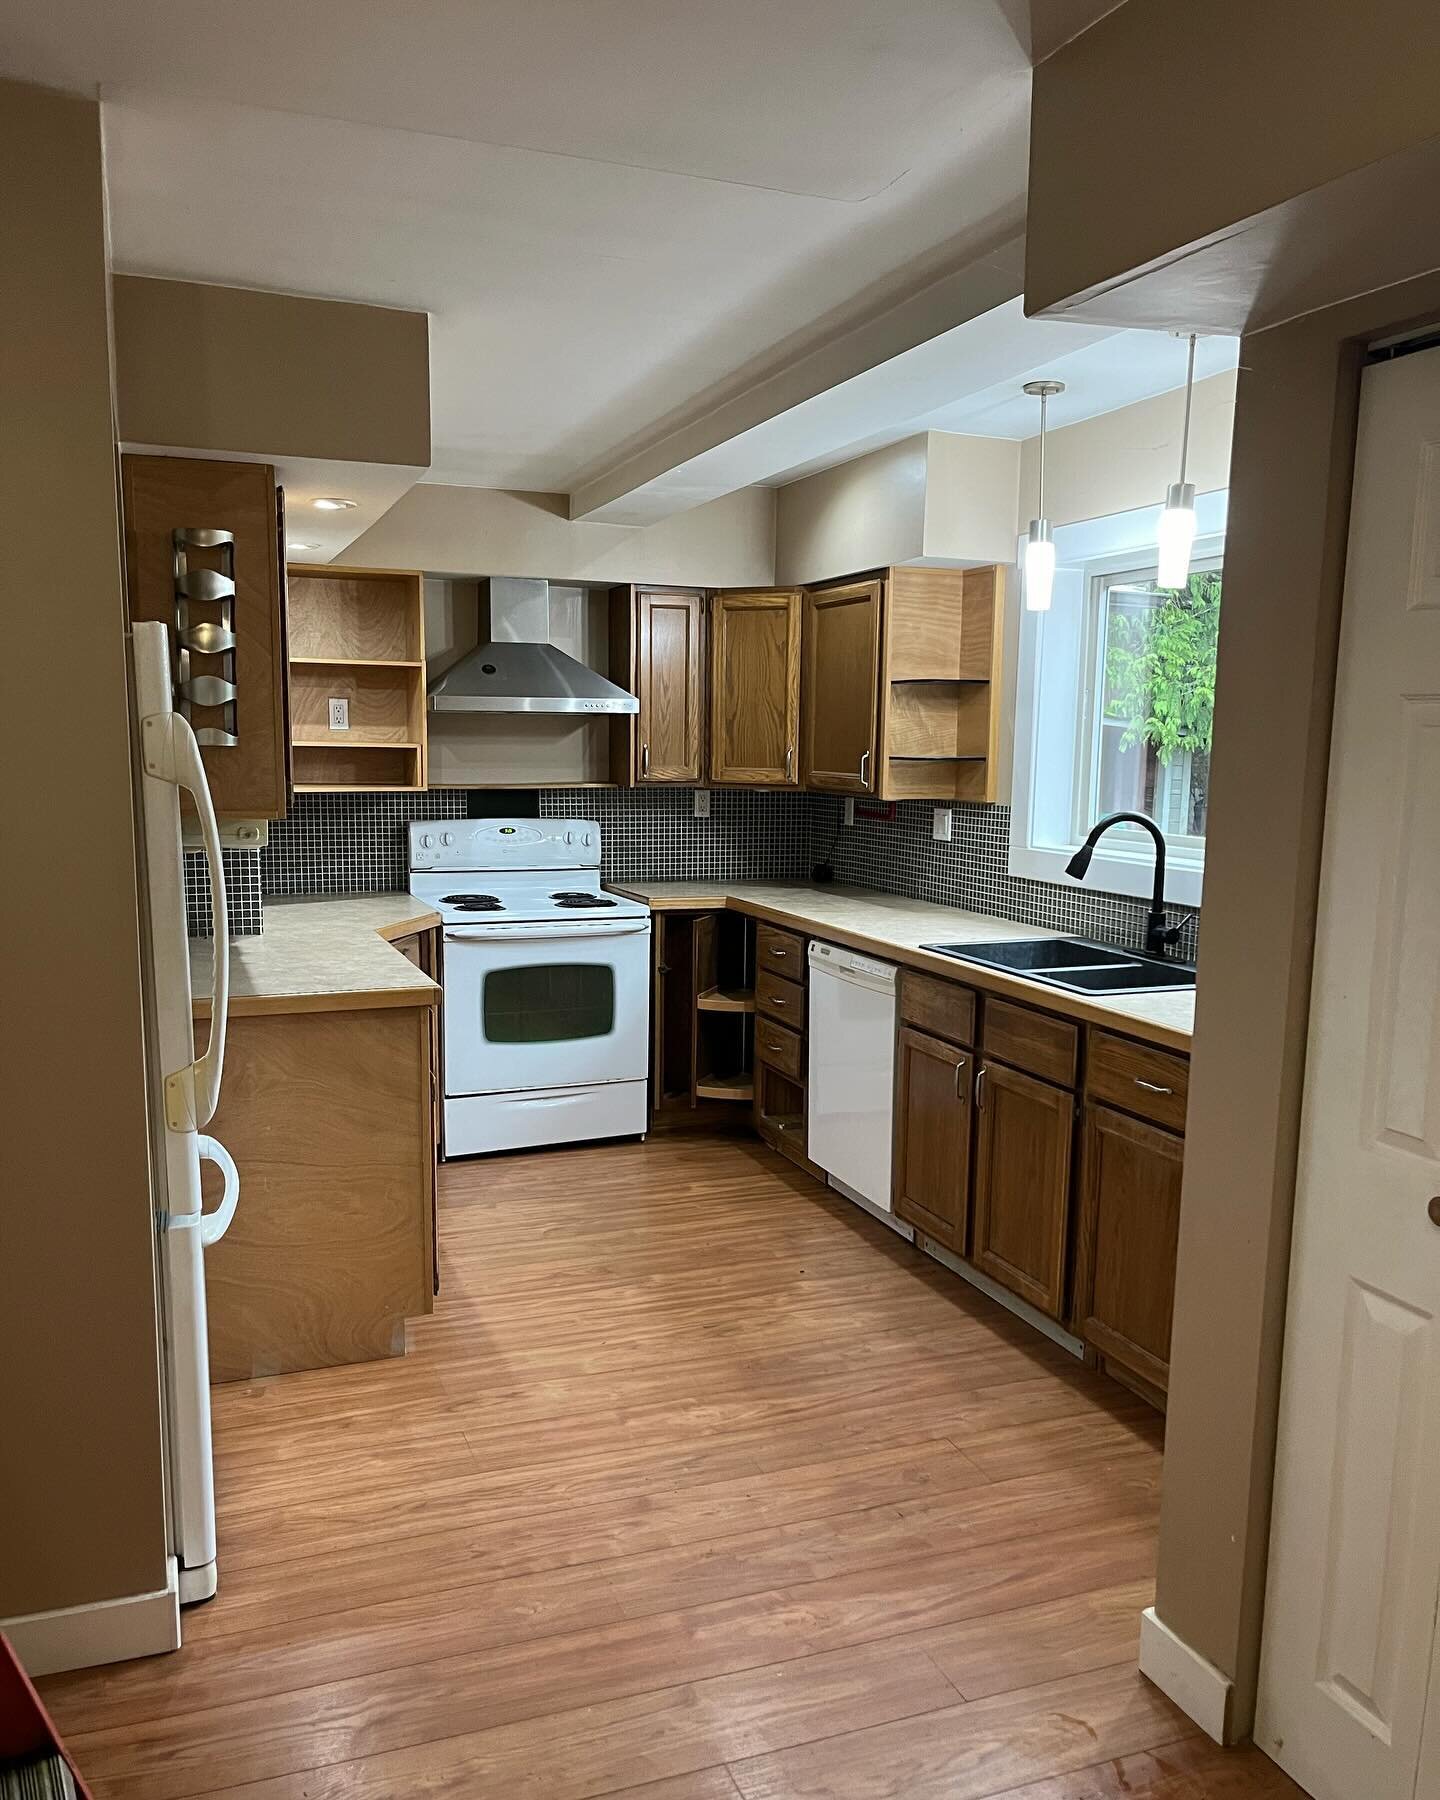 🛠 Steve&rsquo;s Kitchen Demo 🚚

In just 3 hours, Steve from Frank the Ford expertly dismantled a kitchen&mdash;appliances, cabinets, countertops, and backsplash all skillfully removed. Our customer&rsquo;s reaction? &ldquo;There is no one else like